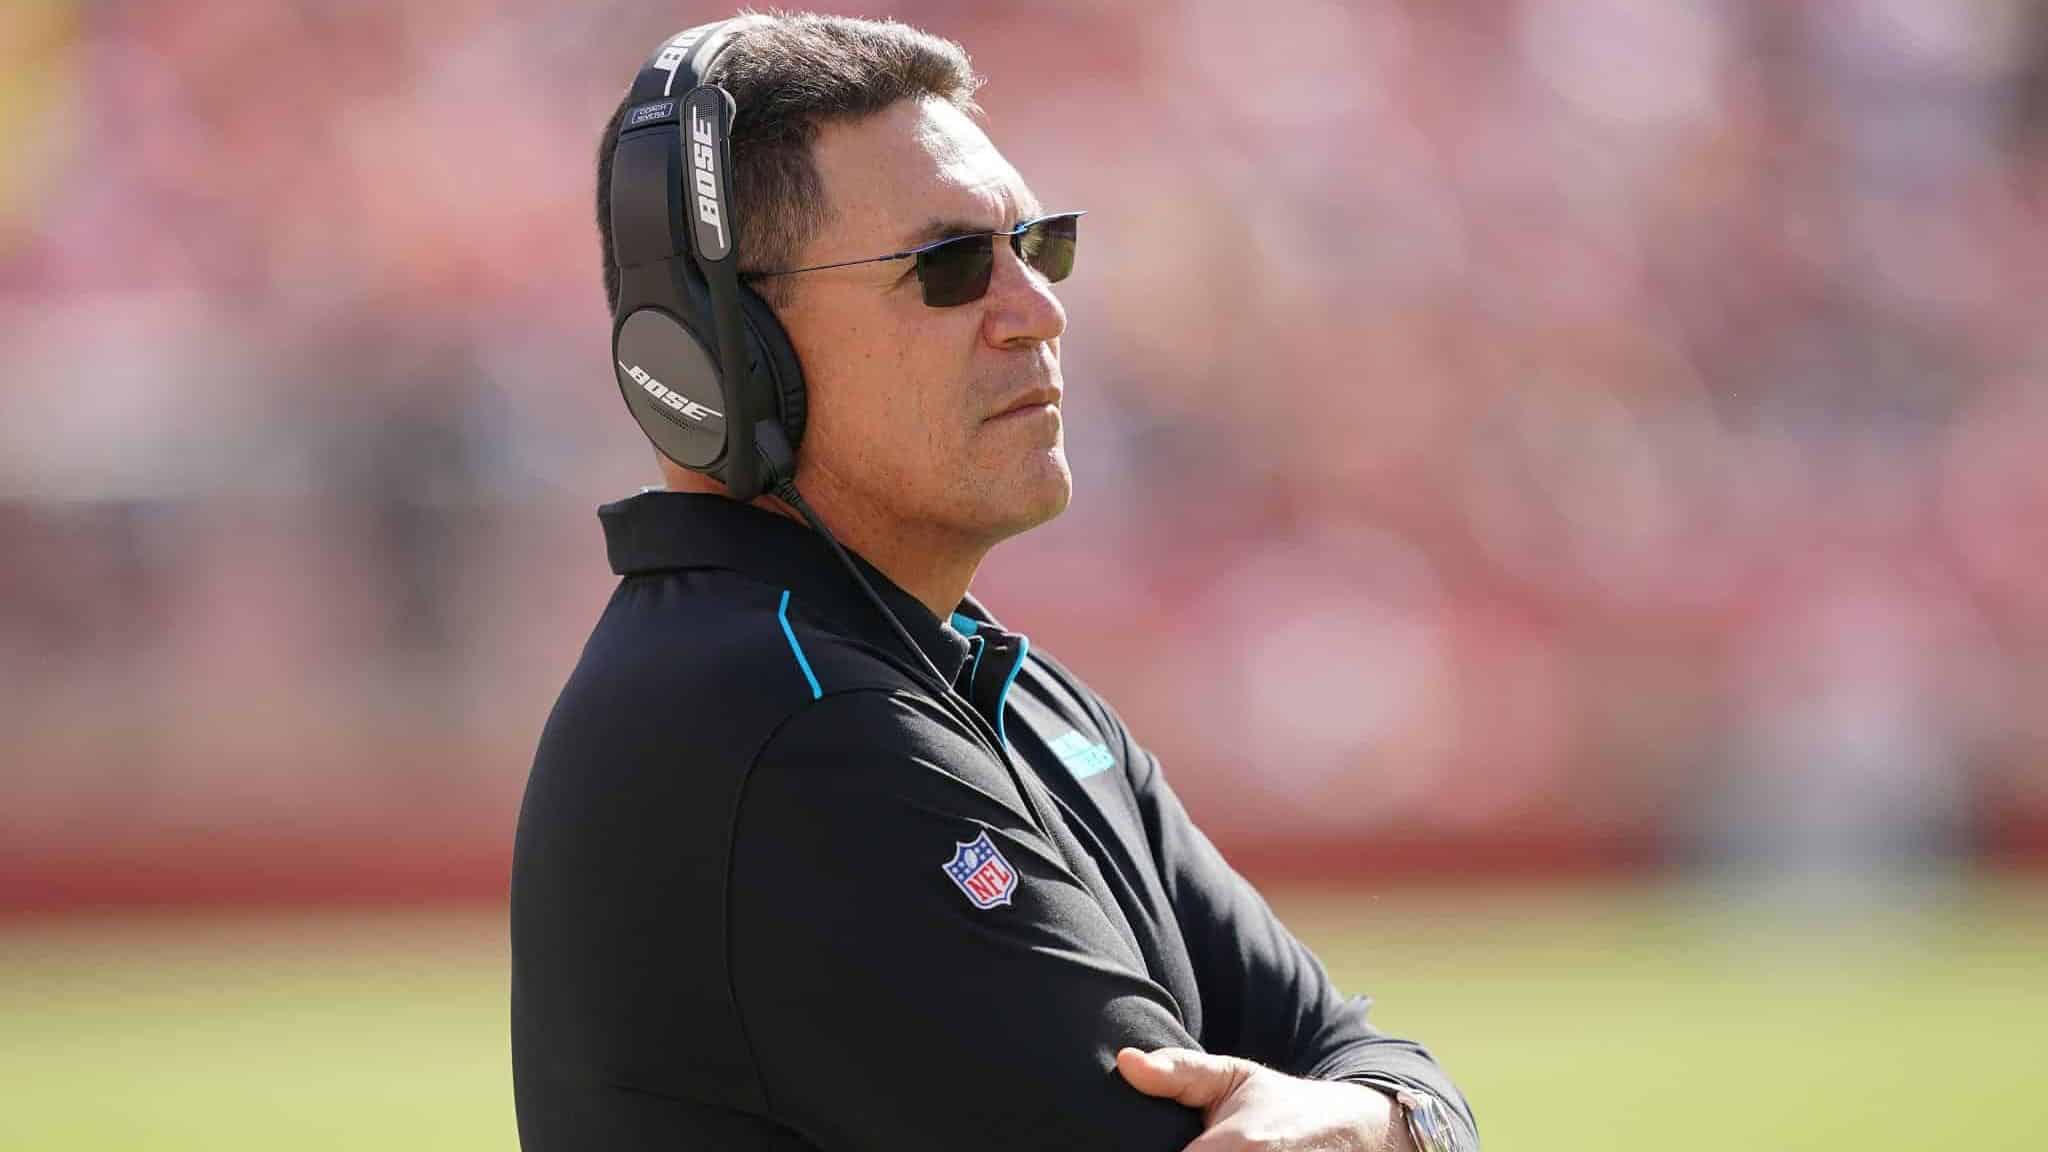 SANTA CLARA, CALIFORNIA - OCTOBER 27: Head coach Ron Rivera of the Carolina Panthers looks on from the sidelines against the San Francisco 49ers during an NFL football game at Levi's Stadium on October 27, 2019 in Santa Clara, California.